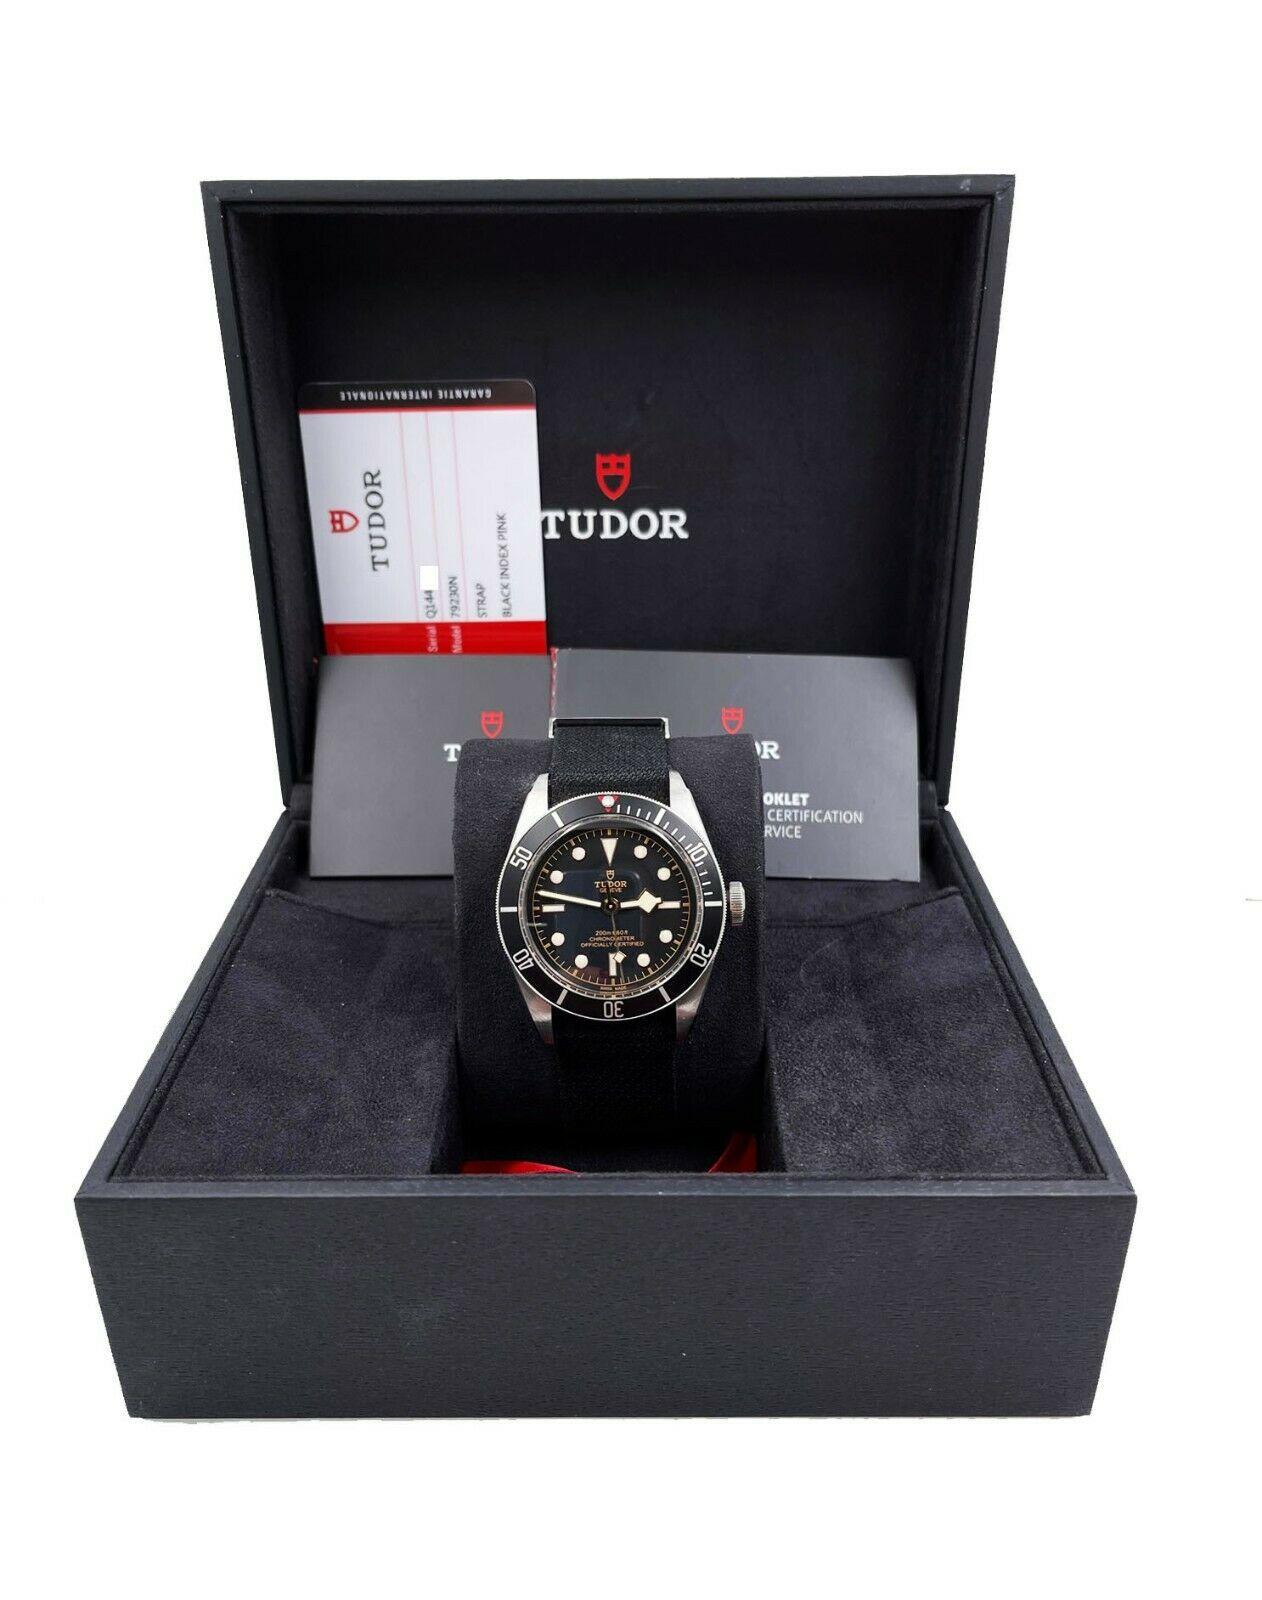 Model Number: 79230N

 

Serial: Q144***


Year: 2019

 

Model: Black Bay

 

Case Material: Stainless Steel

 

Band: Fabric

 

Bezel:  Black

 

Dial: Black

 

Face: Sapphire Crystal 

 

Case Size: 41mm

 

Includes: 

-Tudor Box &